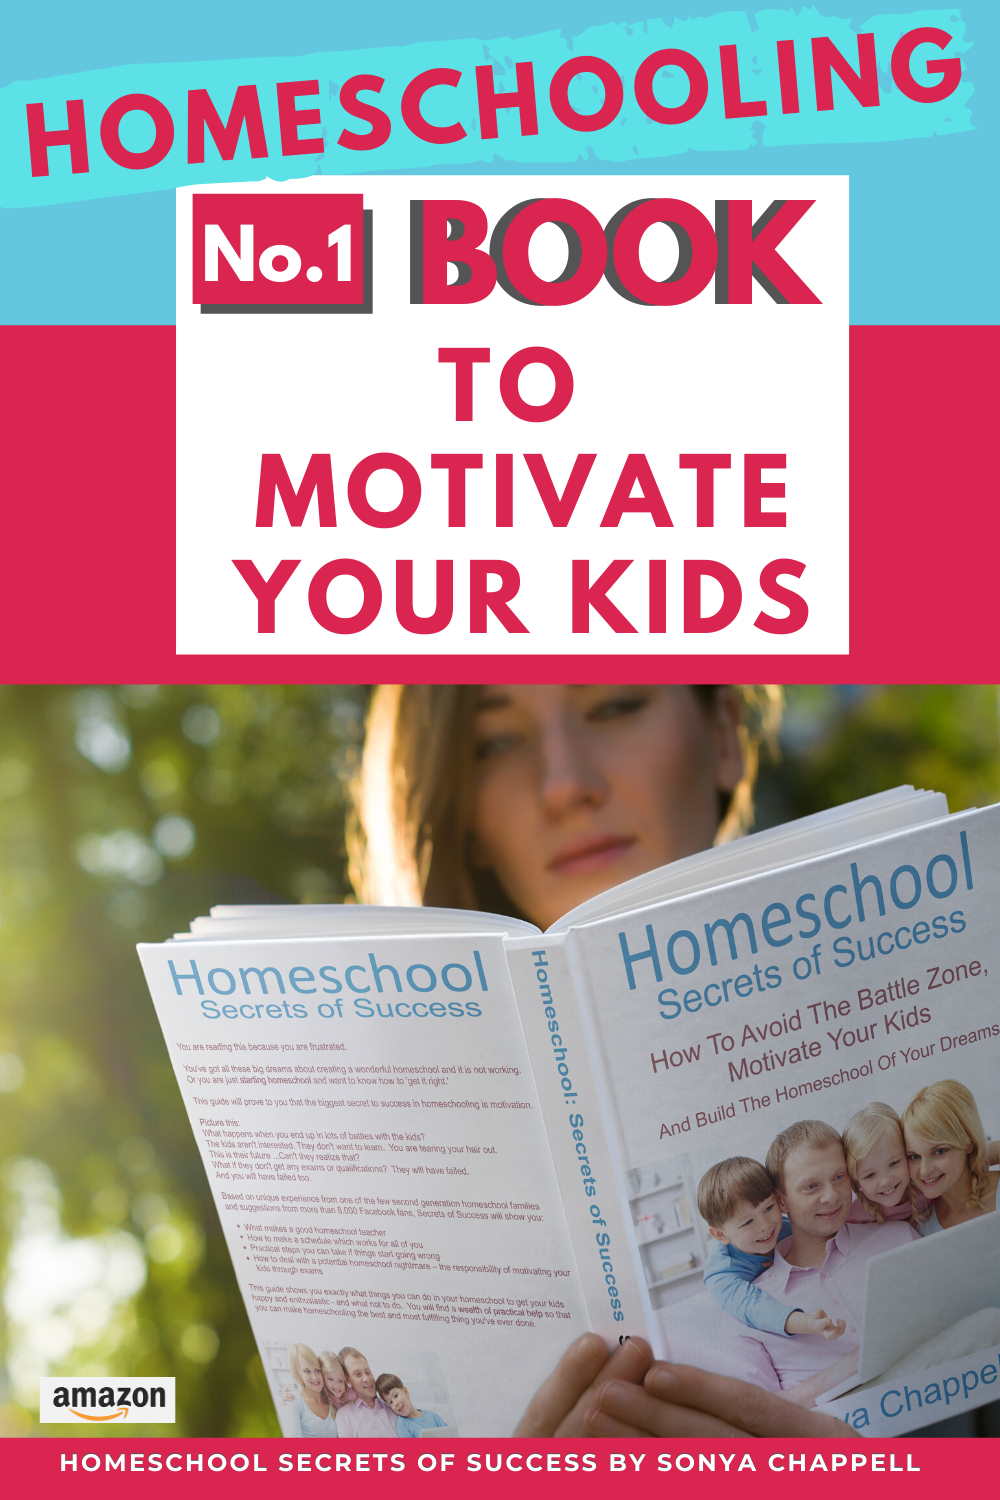 Homeschool Secrets of Success on how to motivate your child by Sonya Chappell